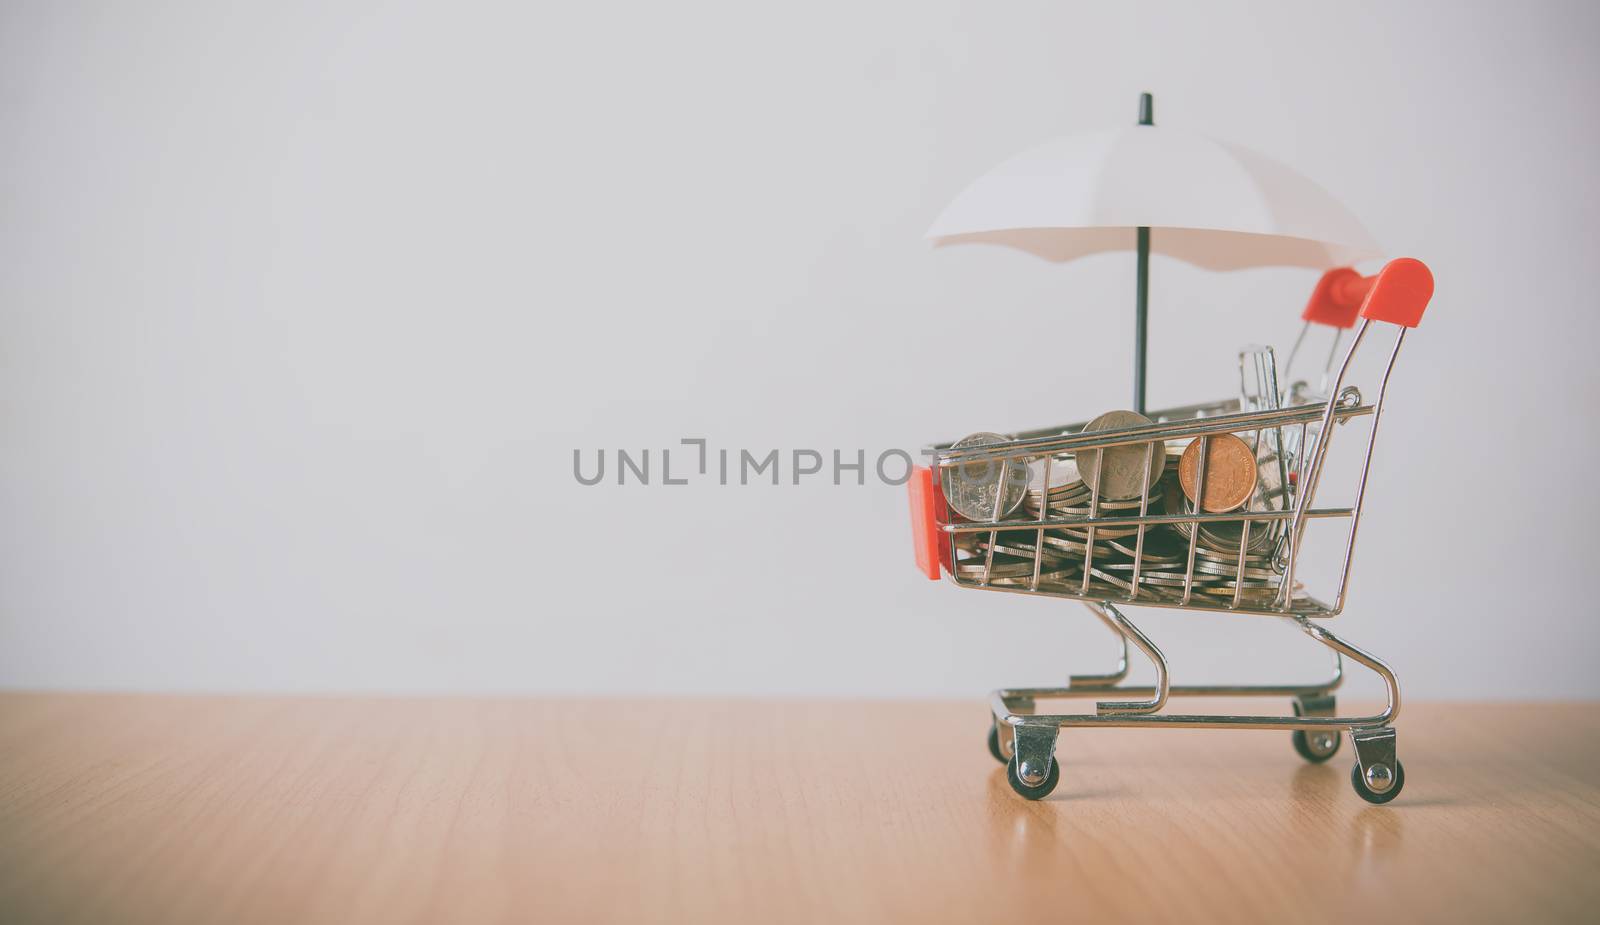 Umbrella is on the currency, the coin is in a shopping cart that by photobyphotoboy